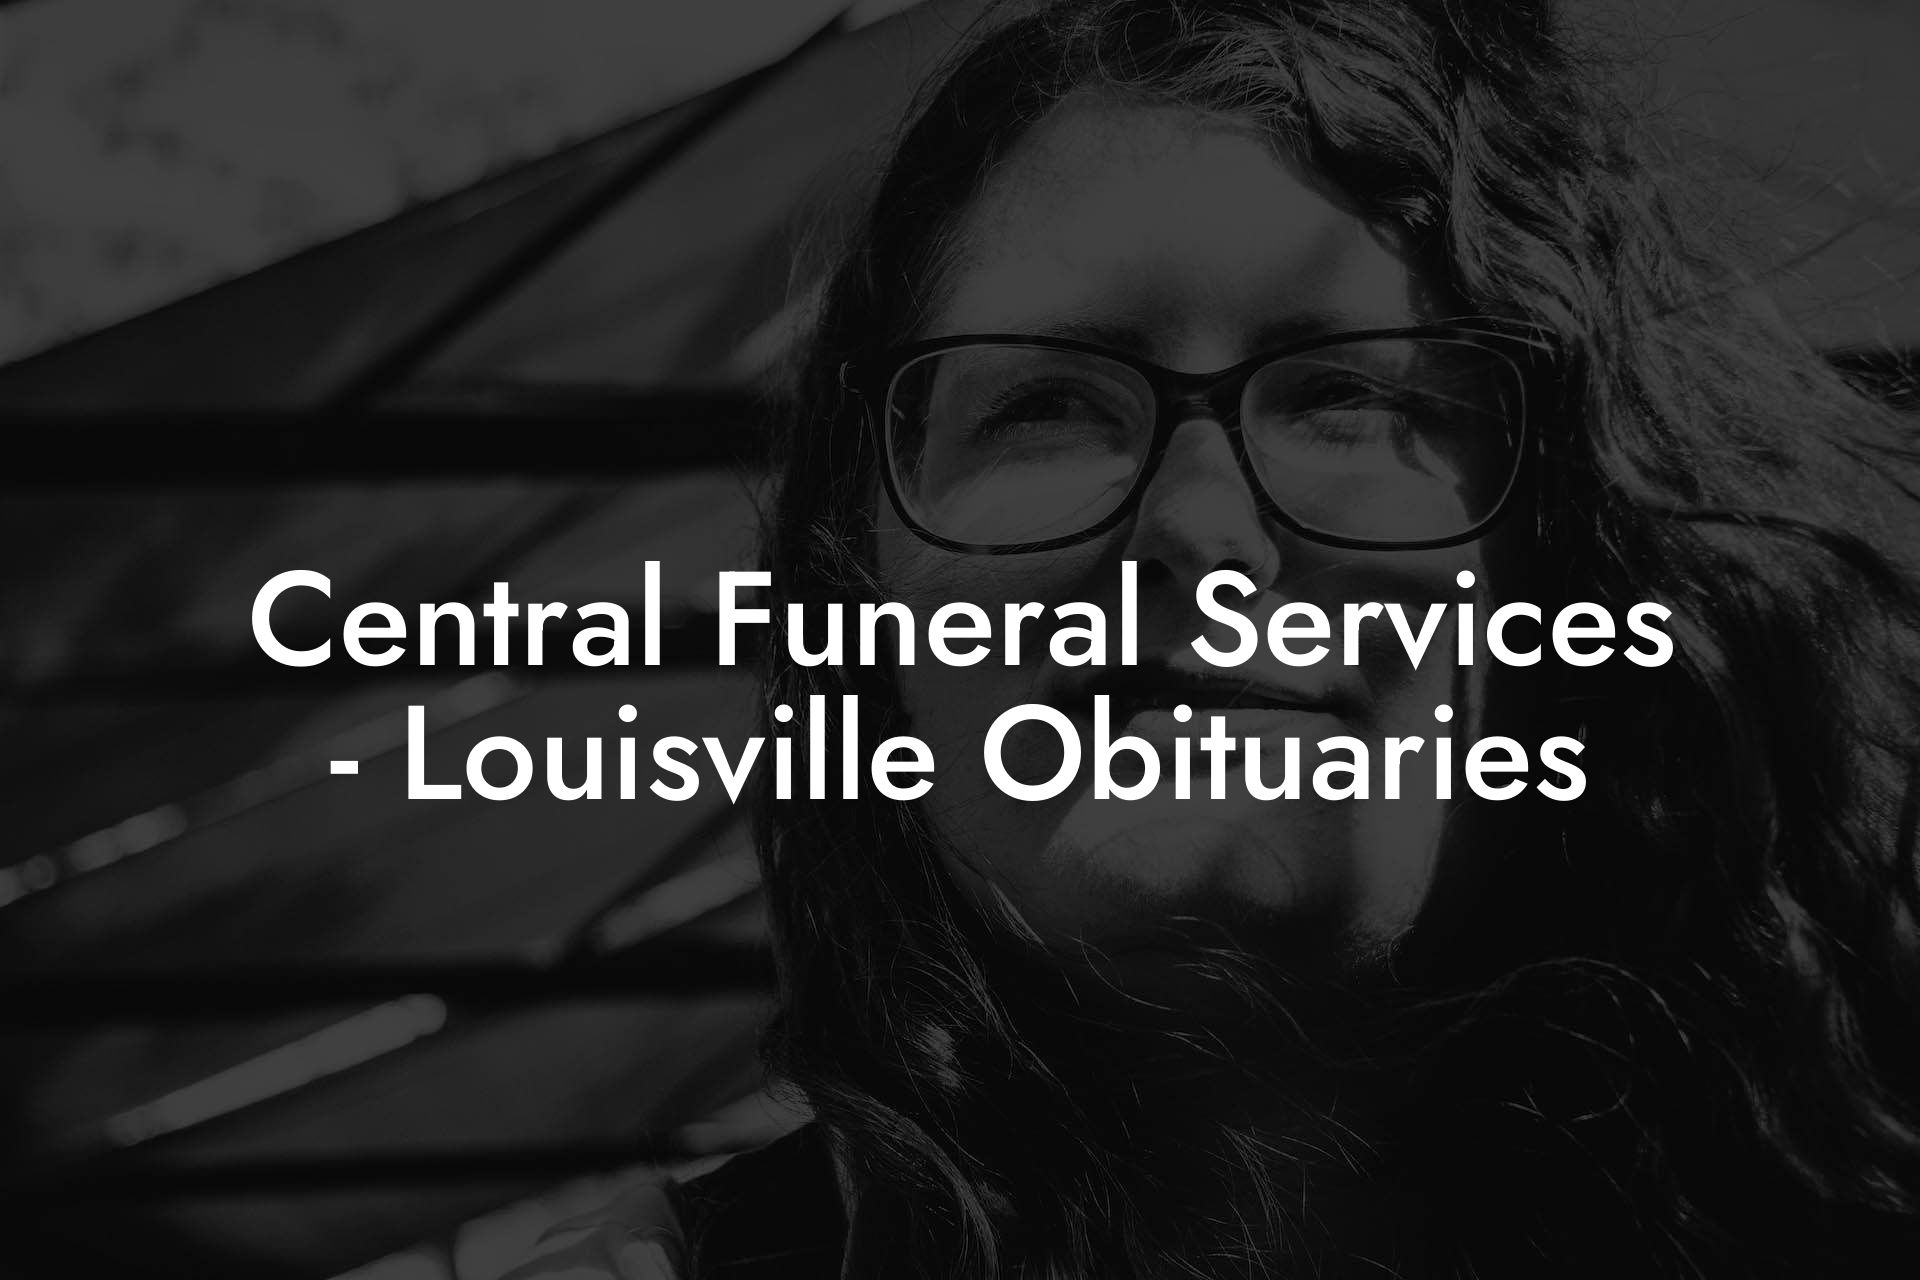 Central Funeral Services - Louisville Obituaries